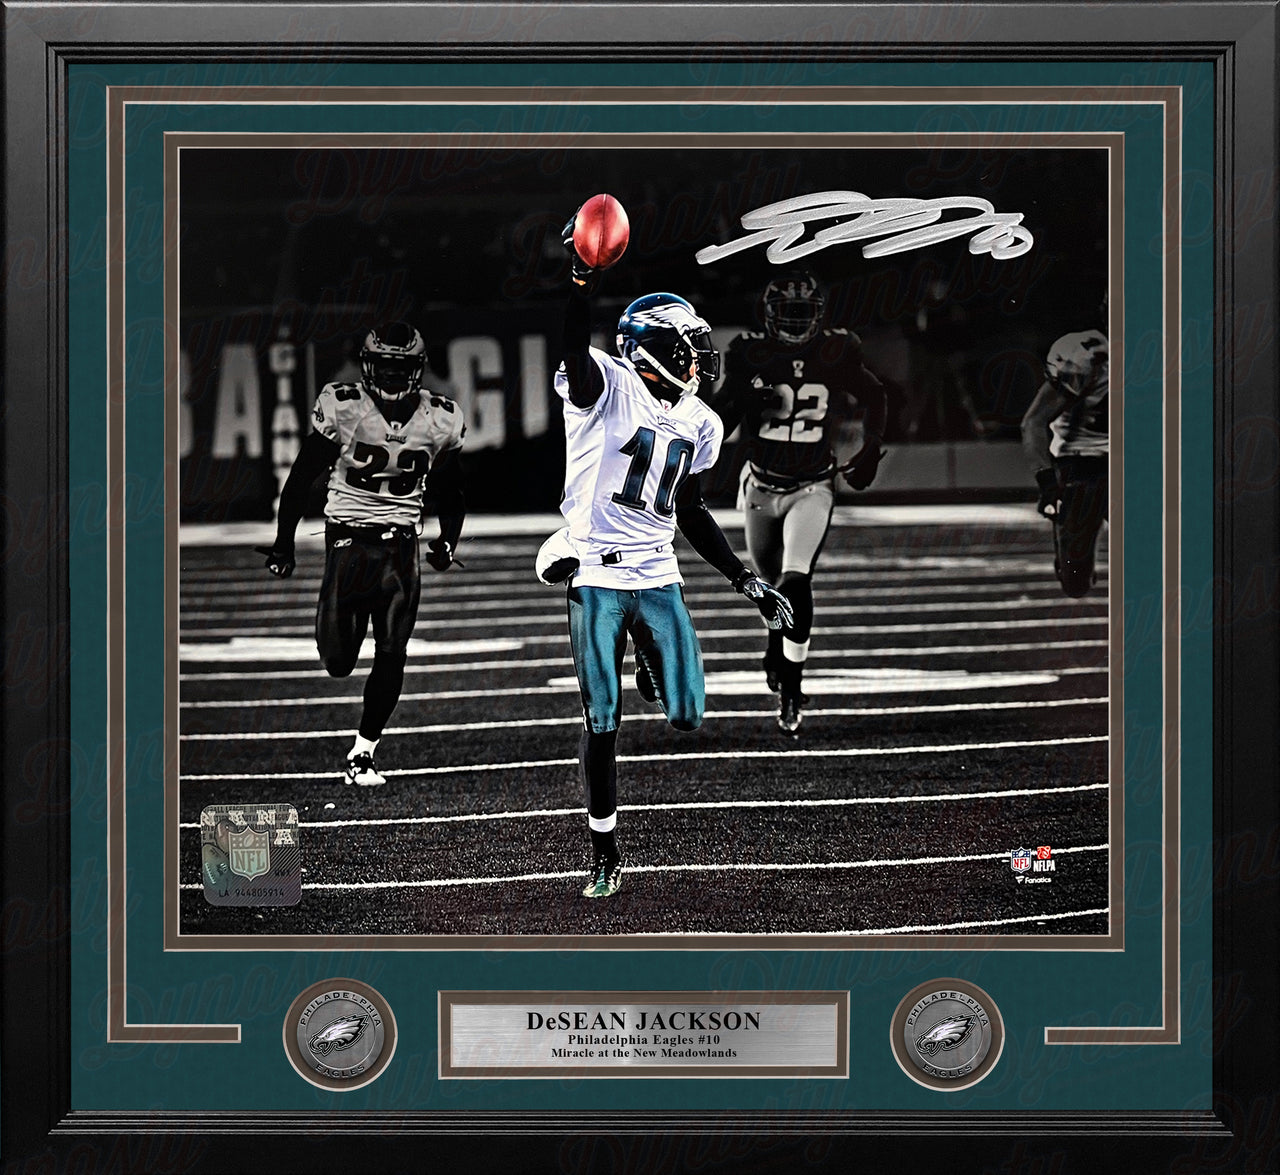 DeSean Jackson Miracle at the New Meadowlands Philadelphia Eagles Autographed 16" x 20" Framed Photo